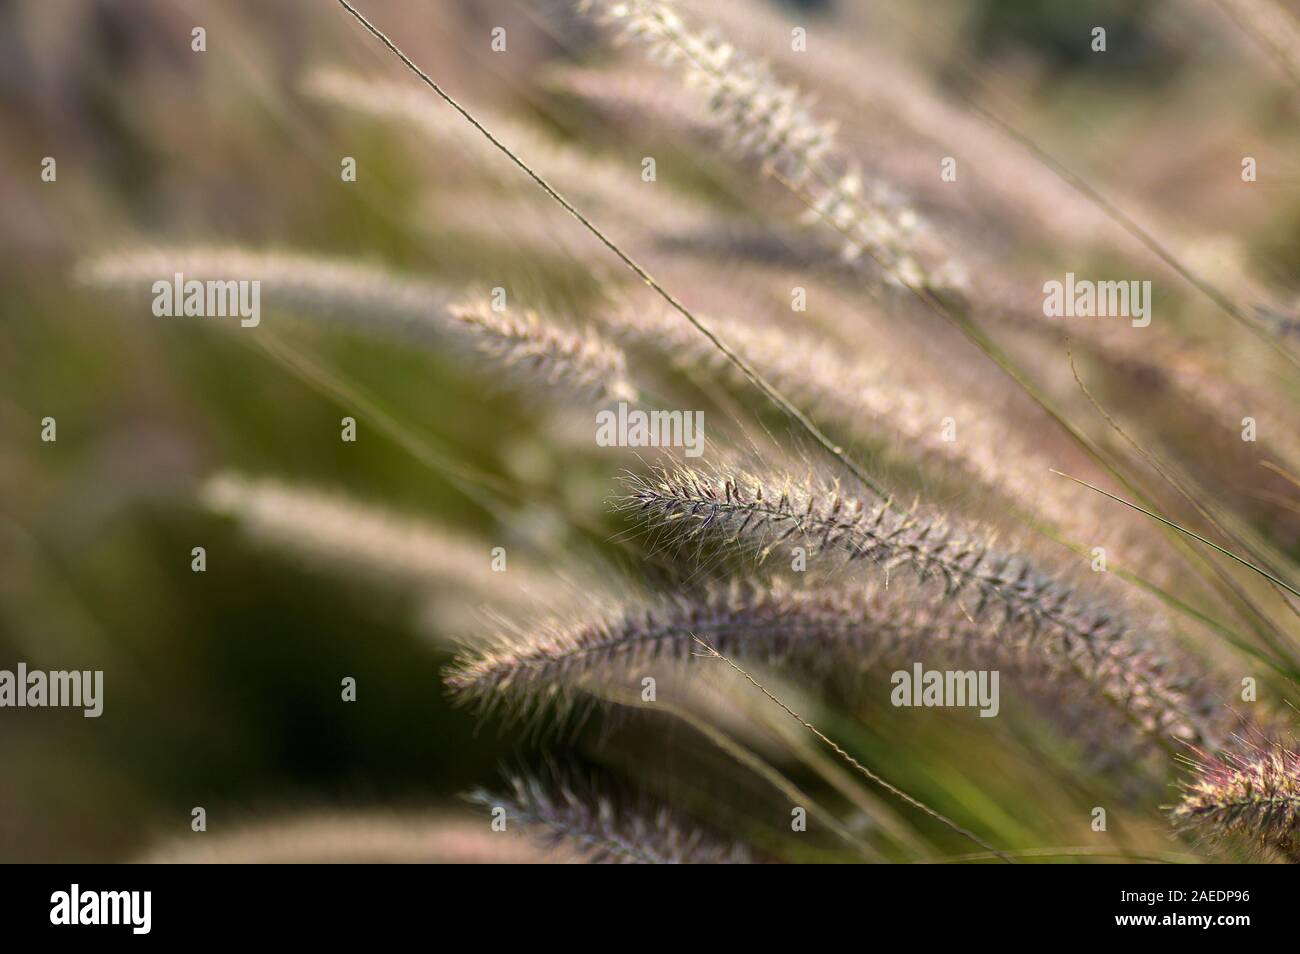 Fountain Grass Ornamental Plant in Garden with soft focus background Stock Photo